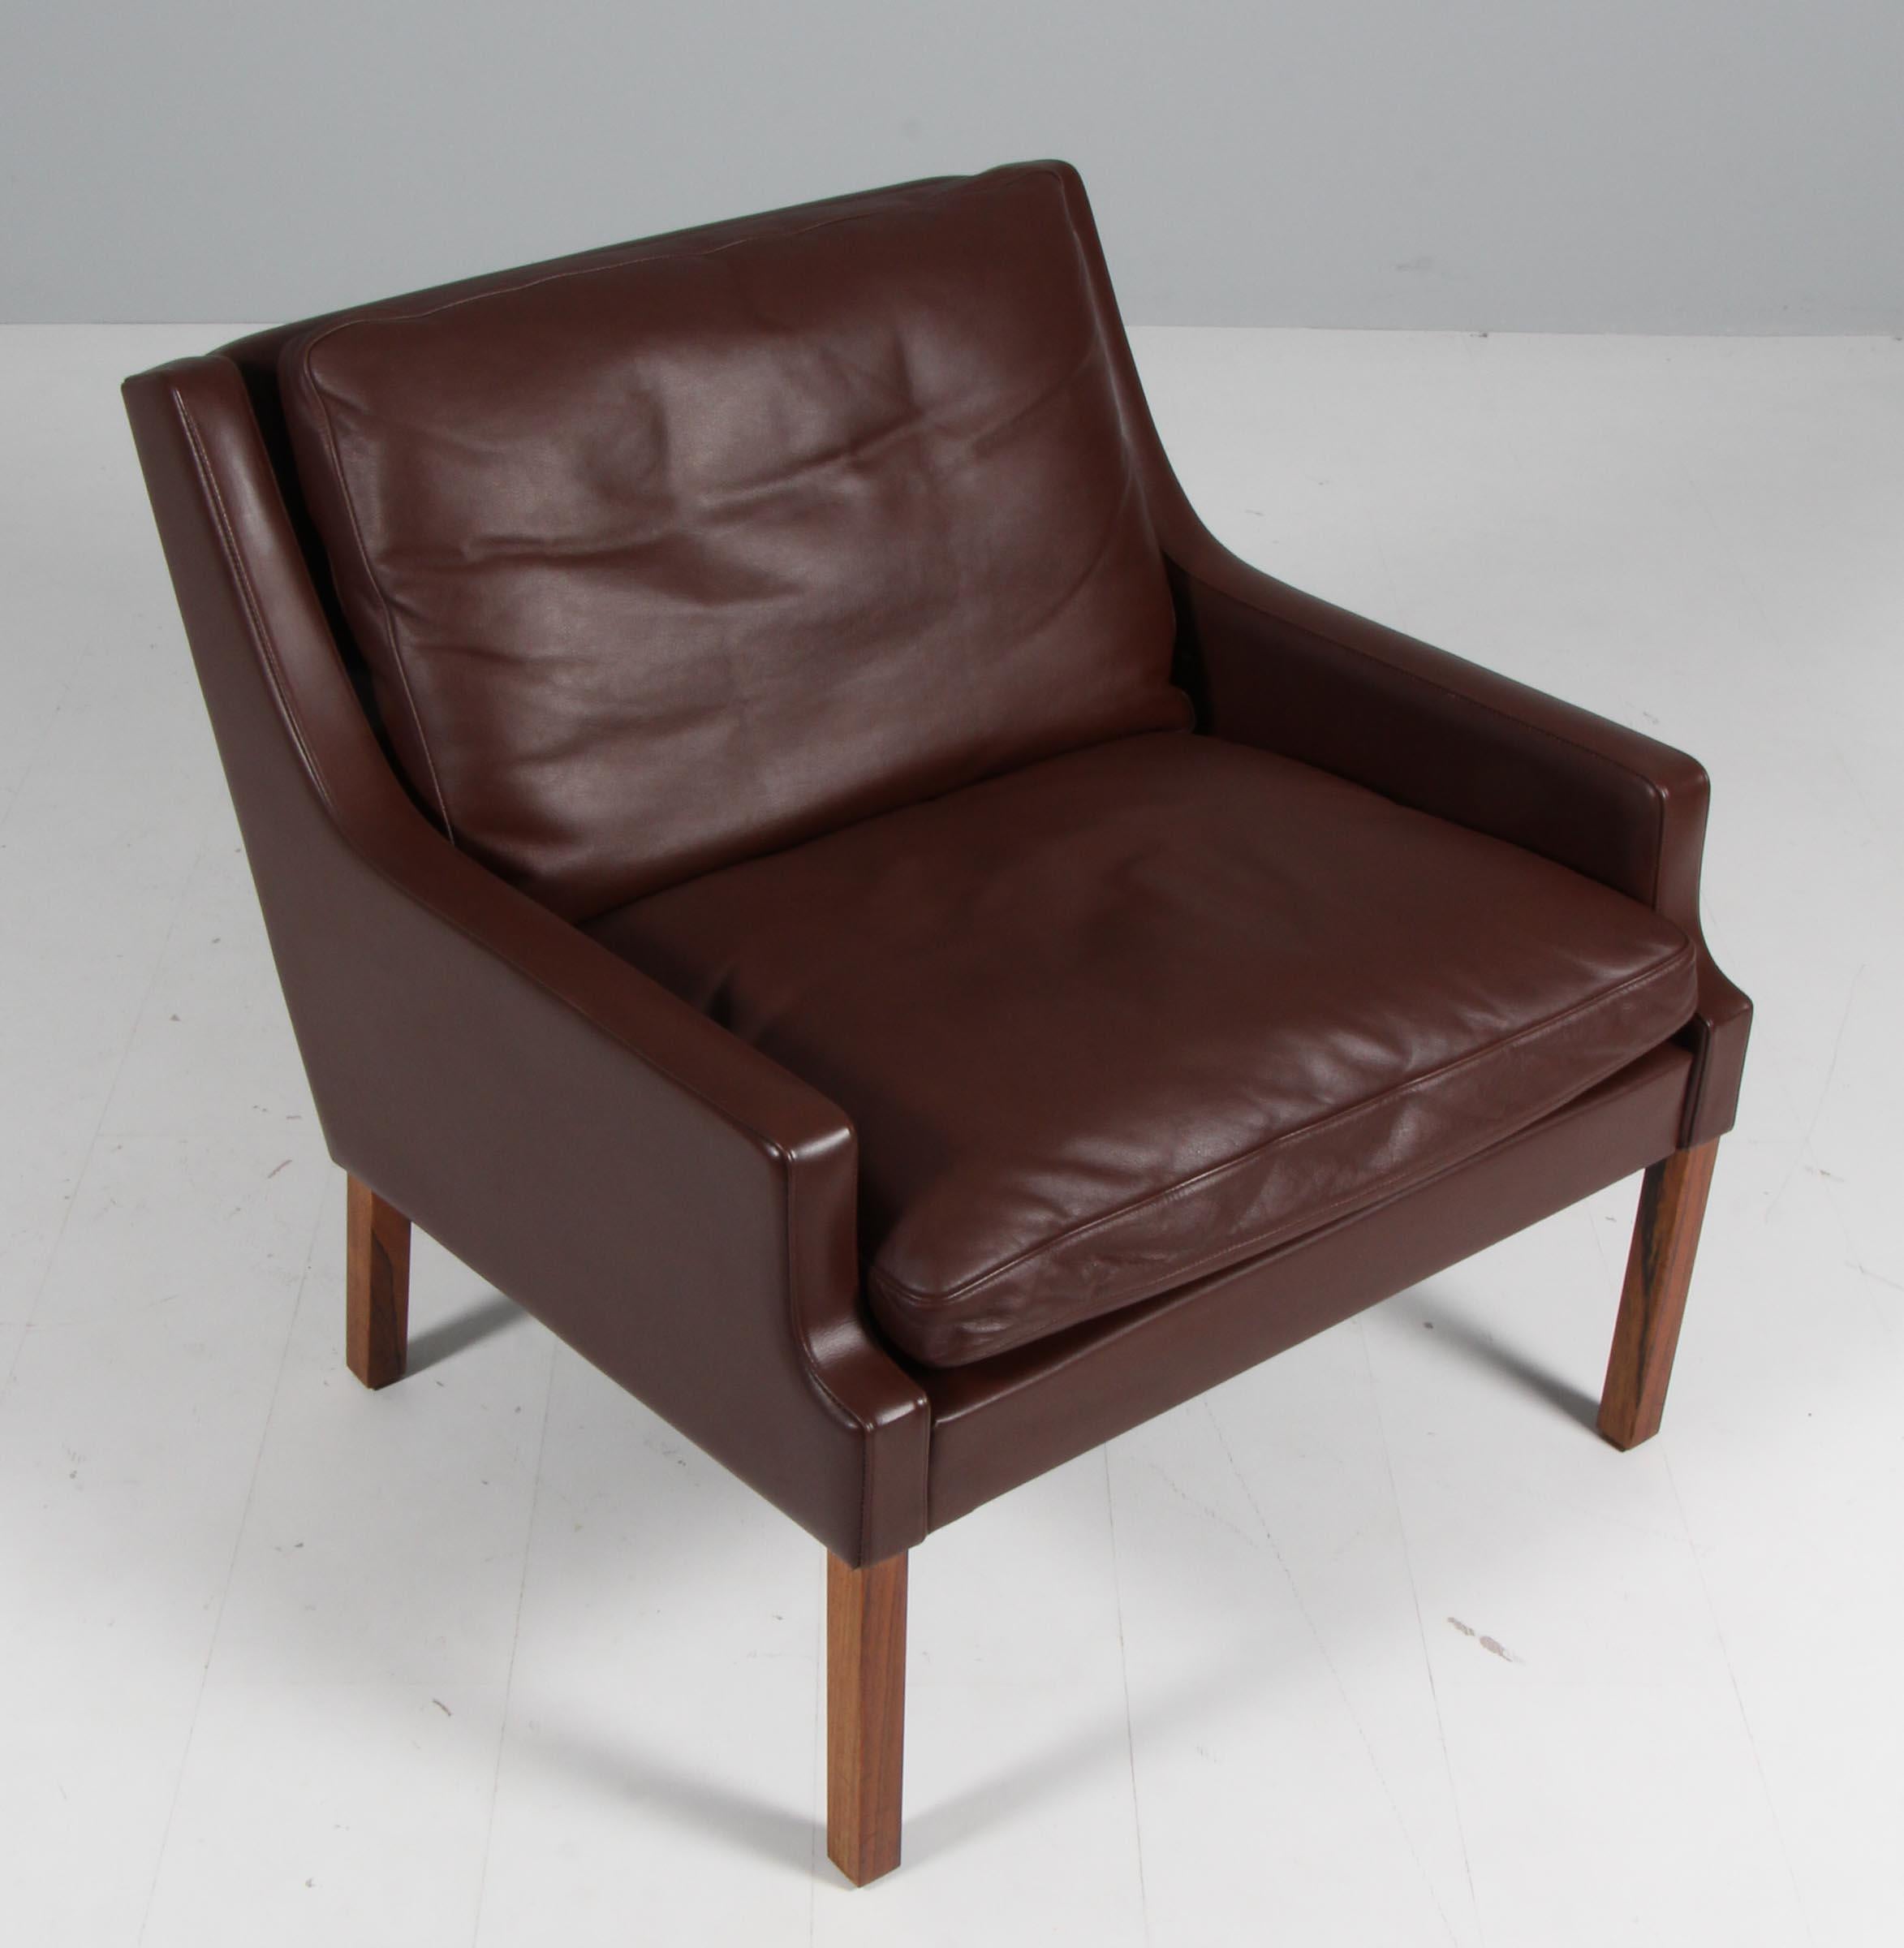 Rud Thygesen lounge chair with legs of rosewood.

Original duvet cushions with brown light patinated leather. 

Made by Thams.